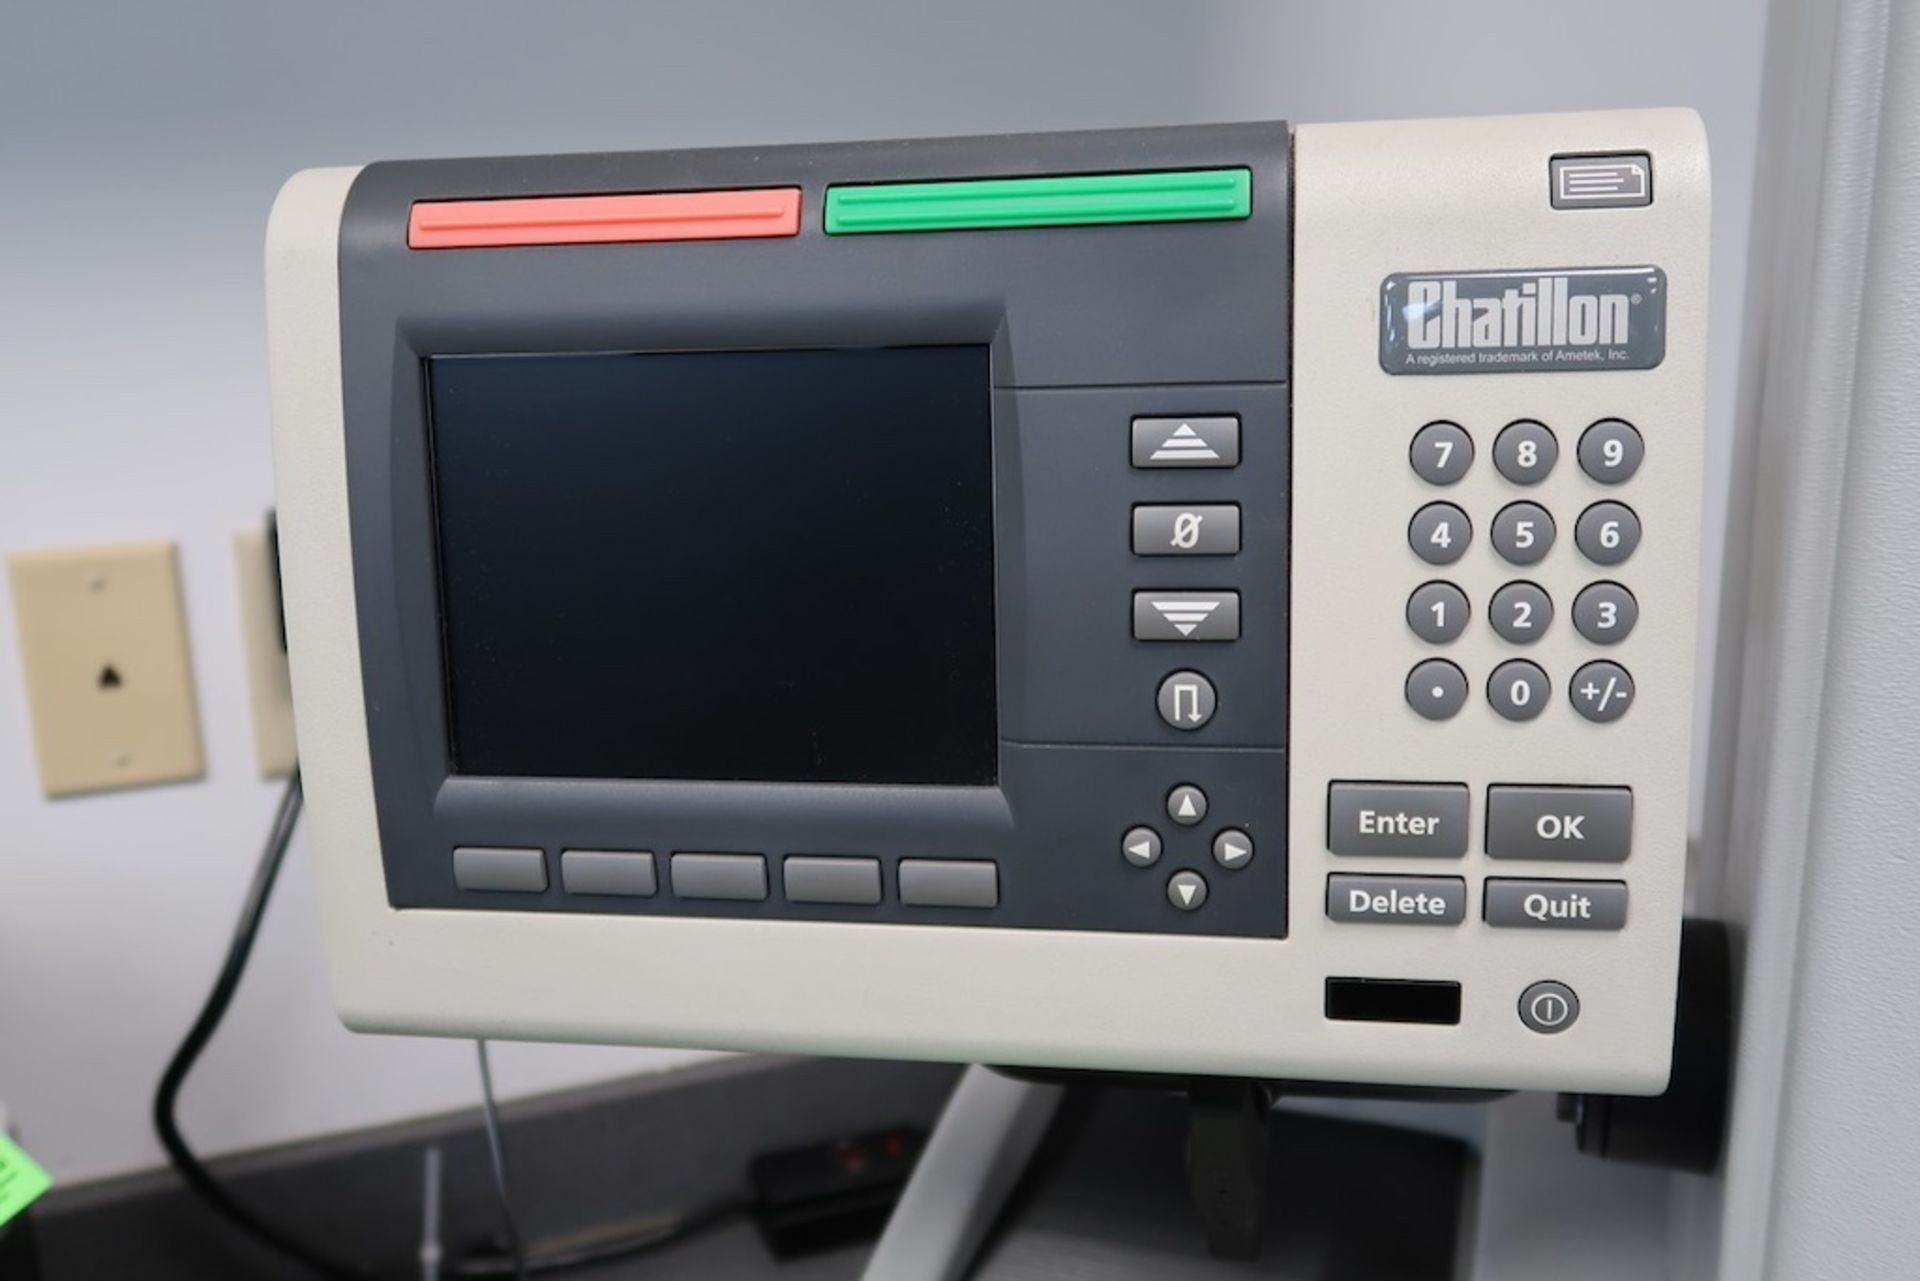 Chatillon TCD225 Force Measurement System - Image 4 of 5